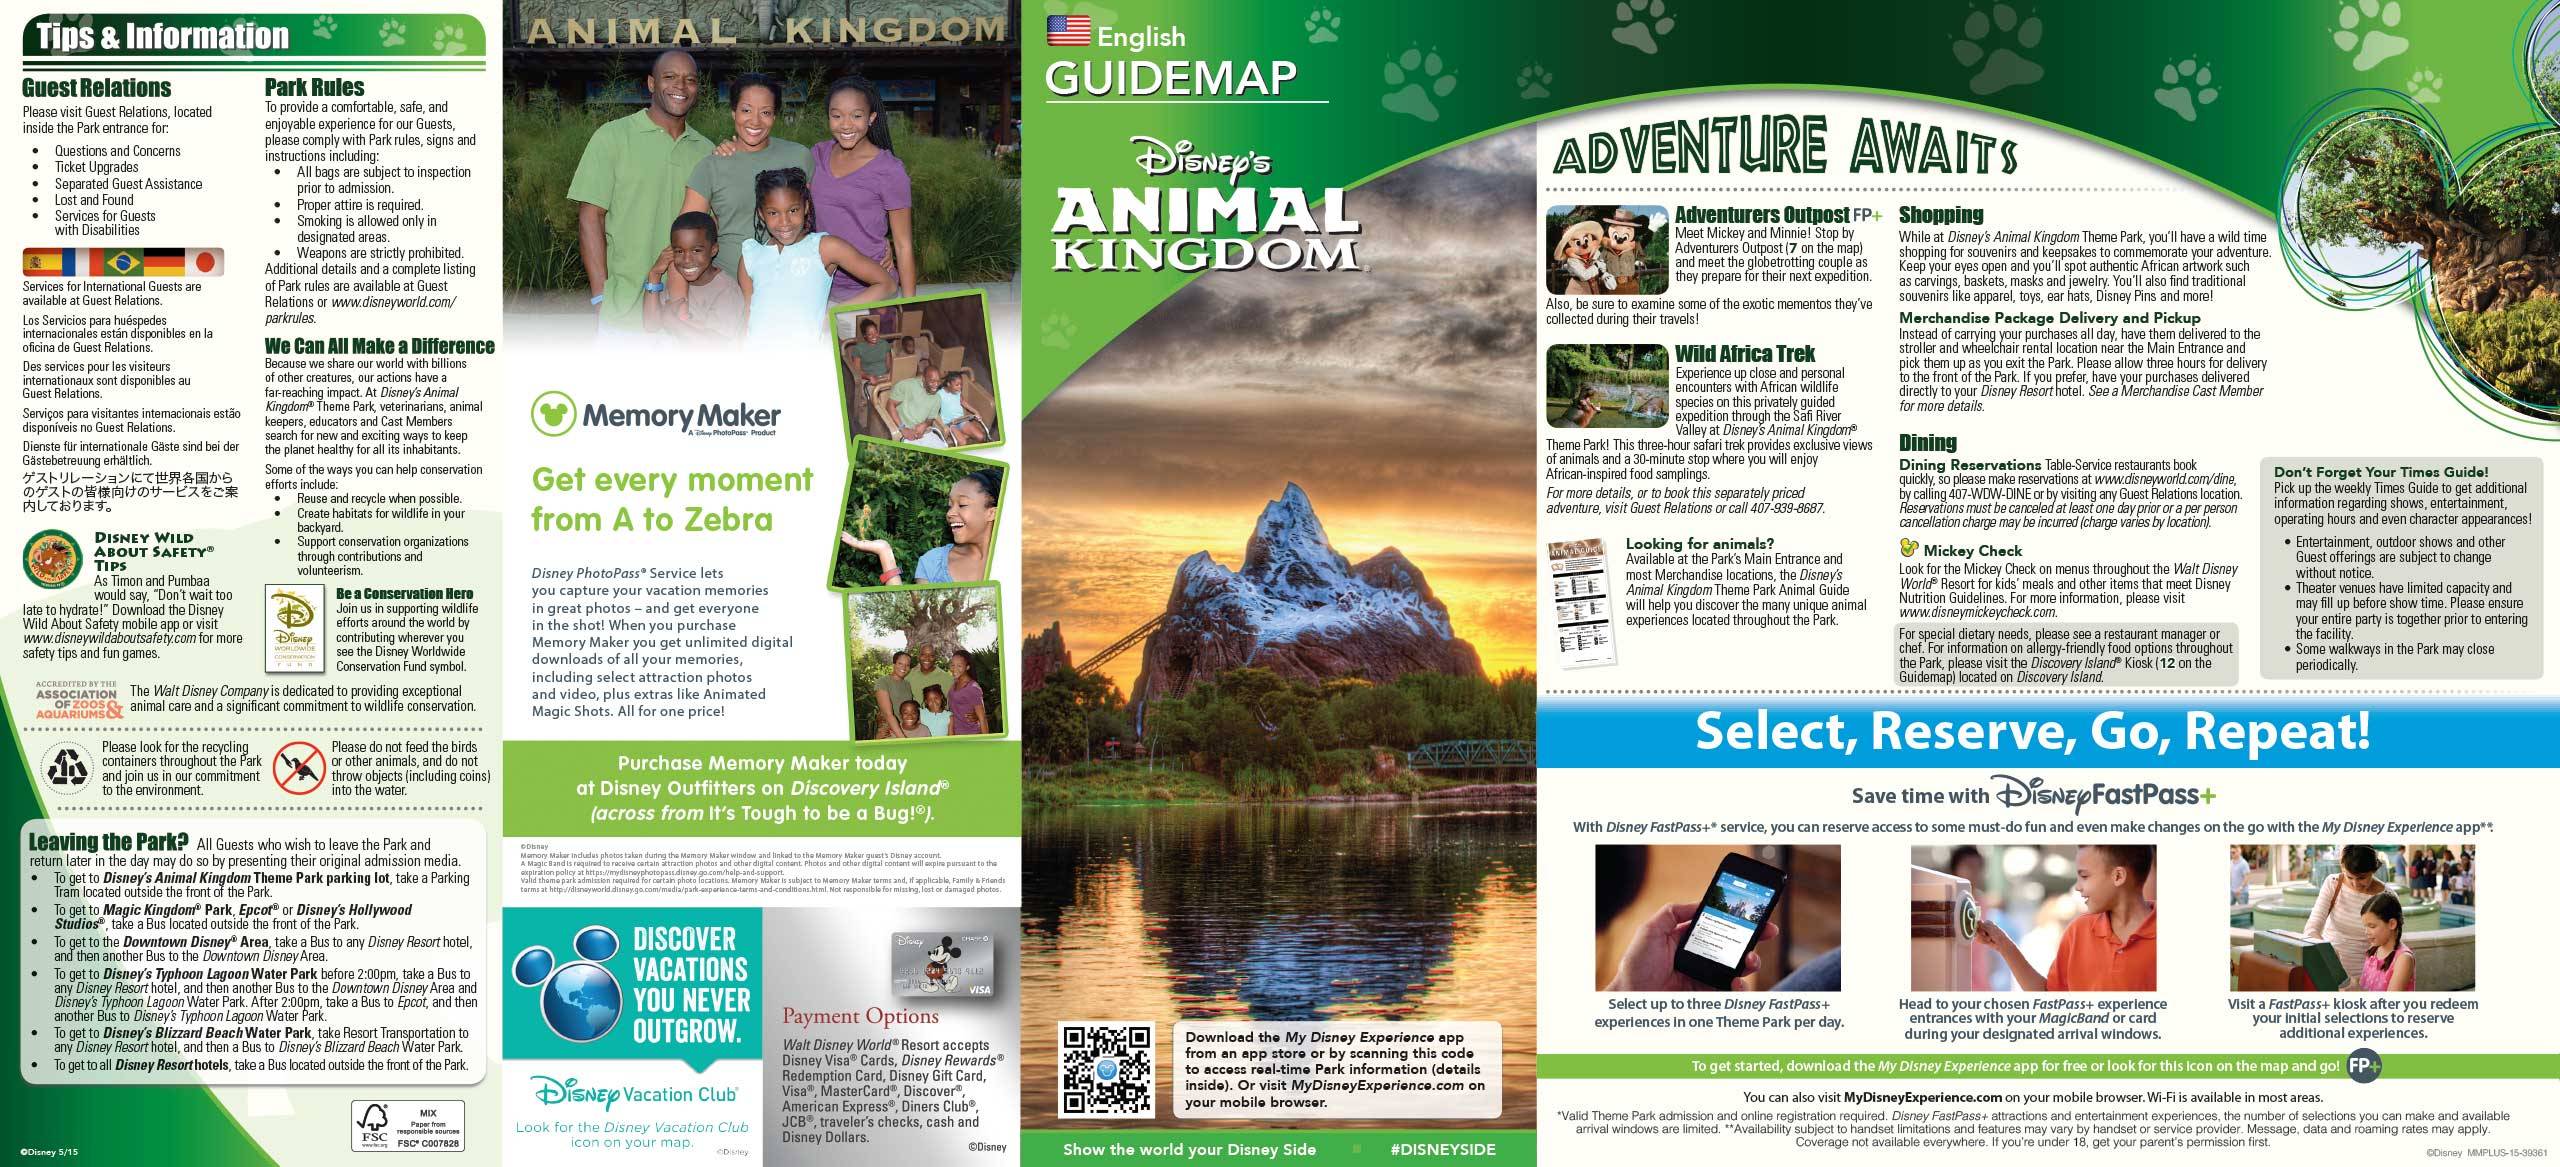 Disney's Animal Kingdom Guide Map May 2015 - Front